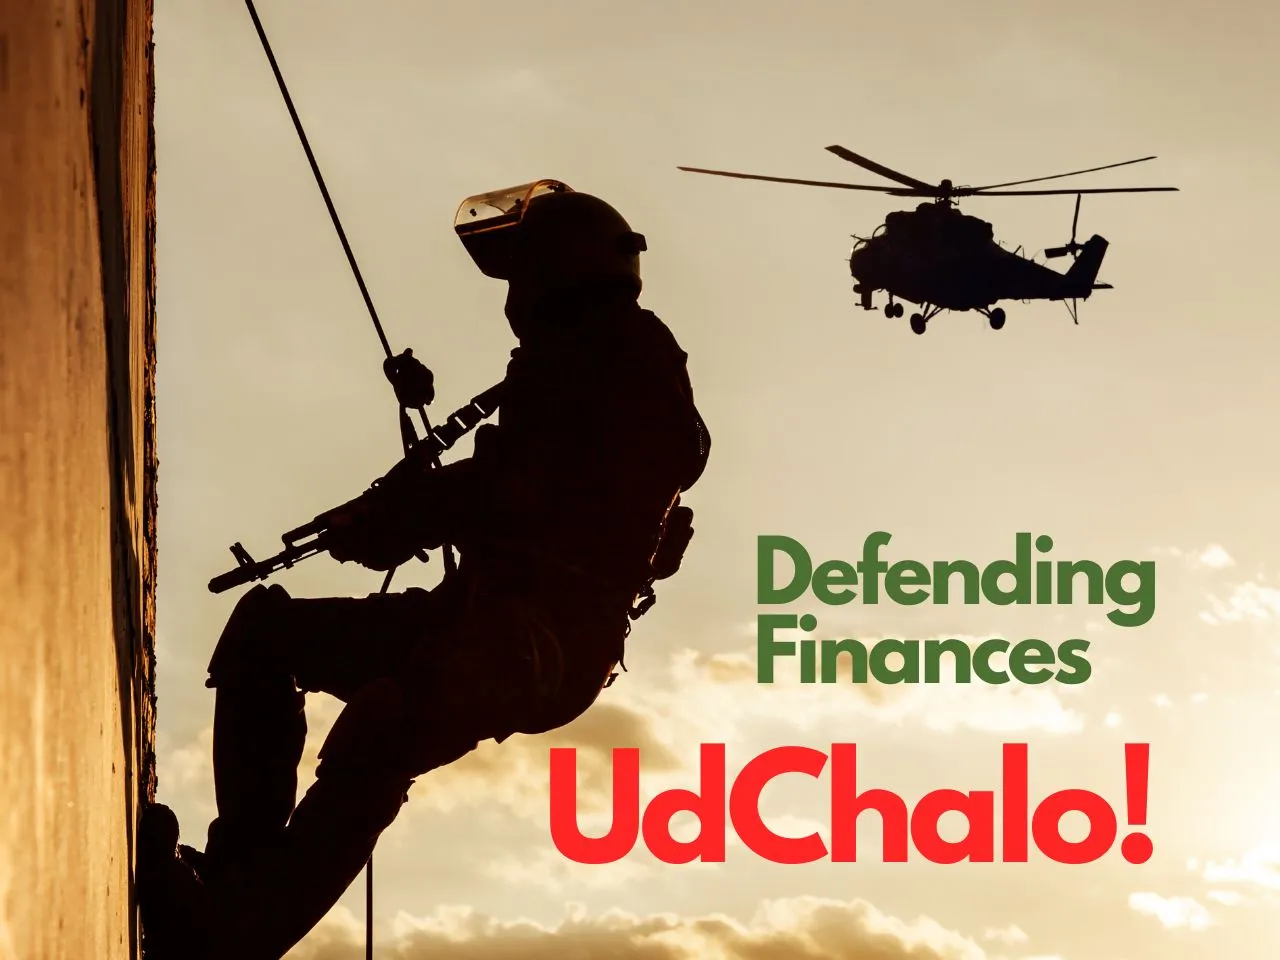 Empowering Lives: UdChalo Gives Wings of Security To 'Fauji Families'